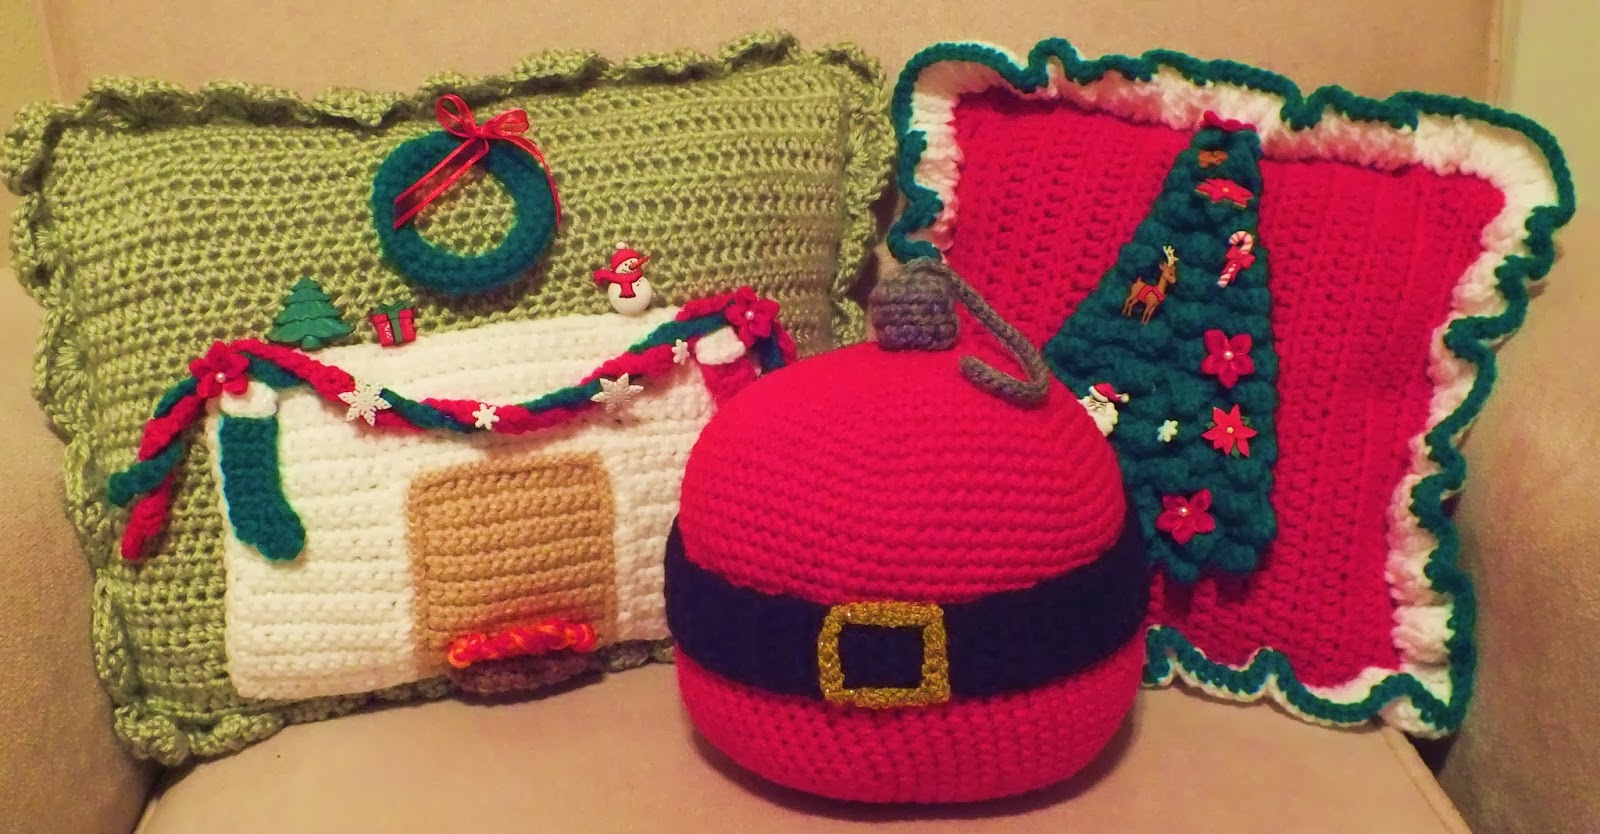 Connie's Spot© Crocheting, Crafting, Creating!: Free Crochet Christmas